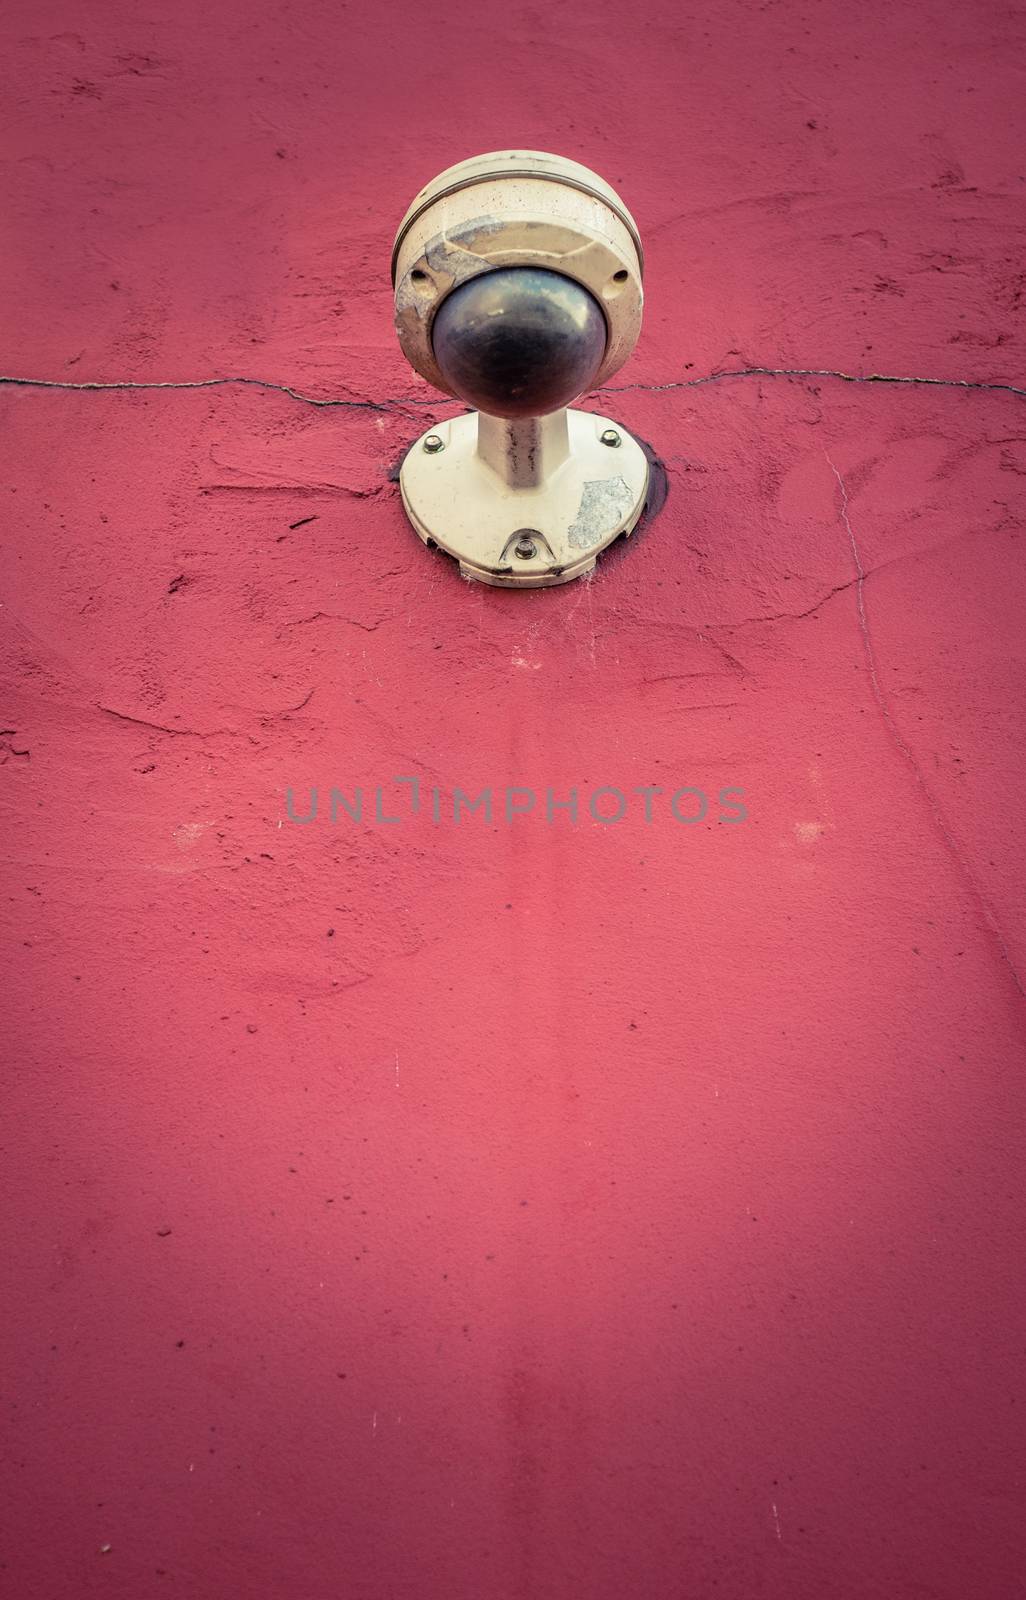 Grungy CCTV Or Surveillance Camera On A Red Wall With Copy Space